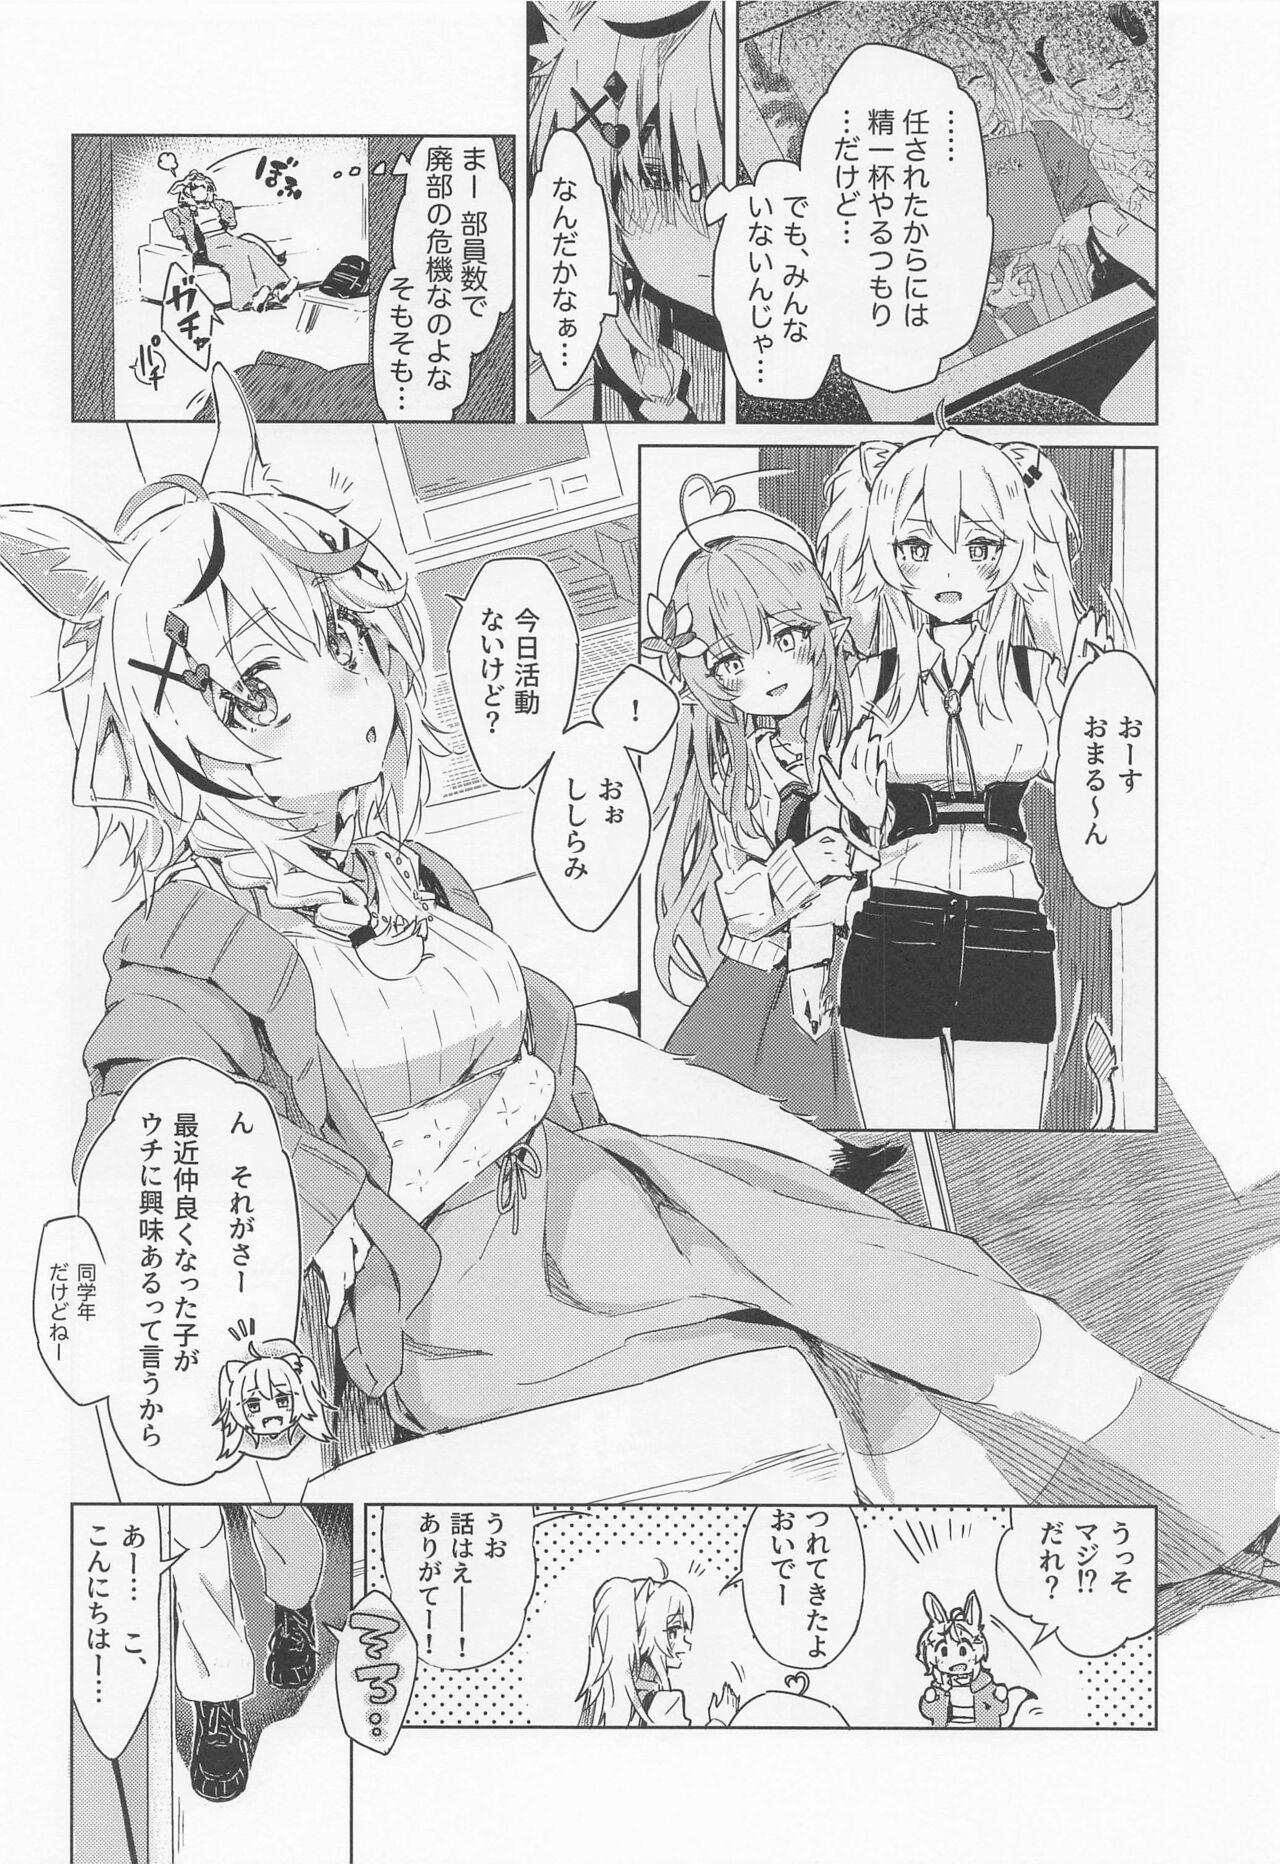 Hardcore Porno Fennec wa Iseijin no Yume o Miru ka - Does The Fennec Dream of The Lovely Visitor? - Hololive Cruising - Page 3